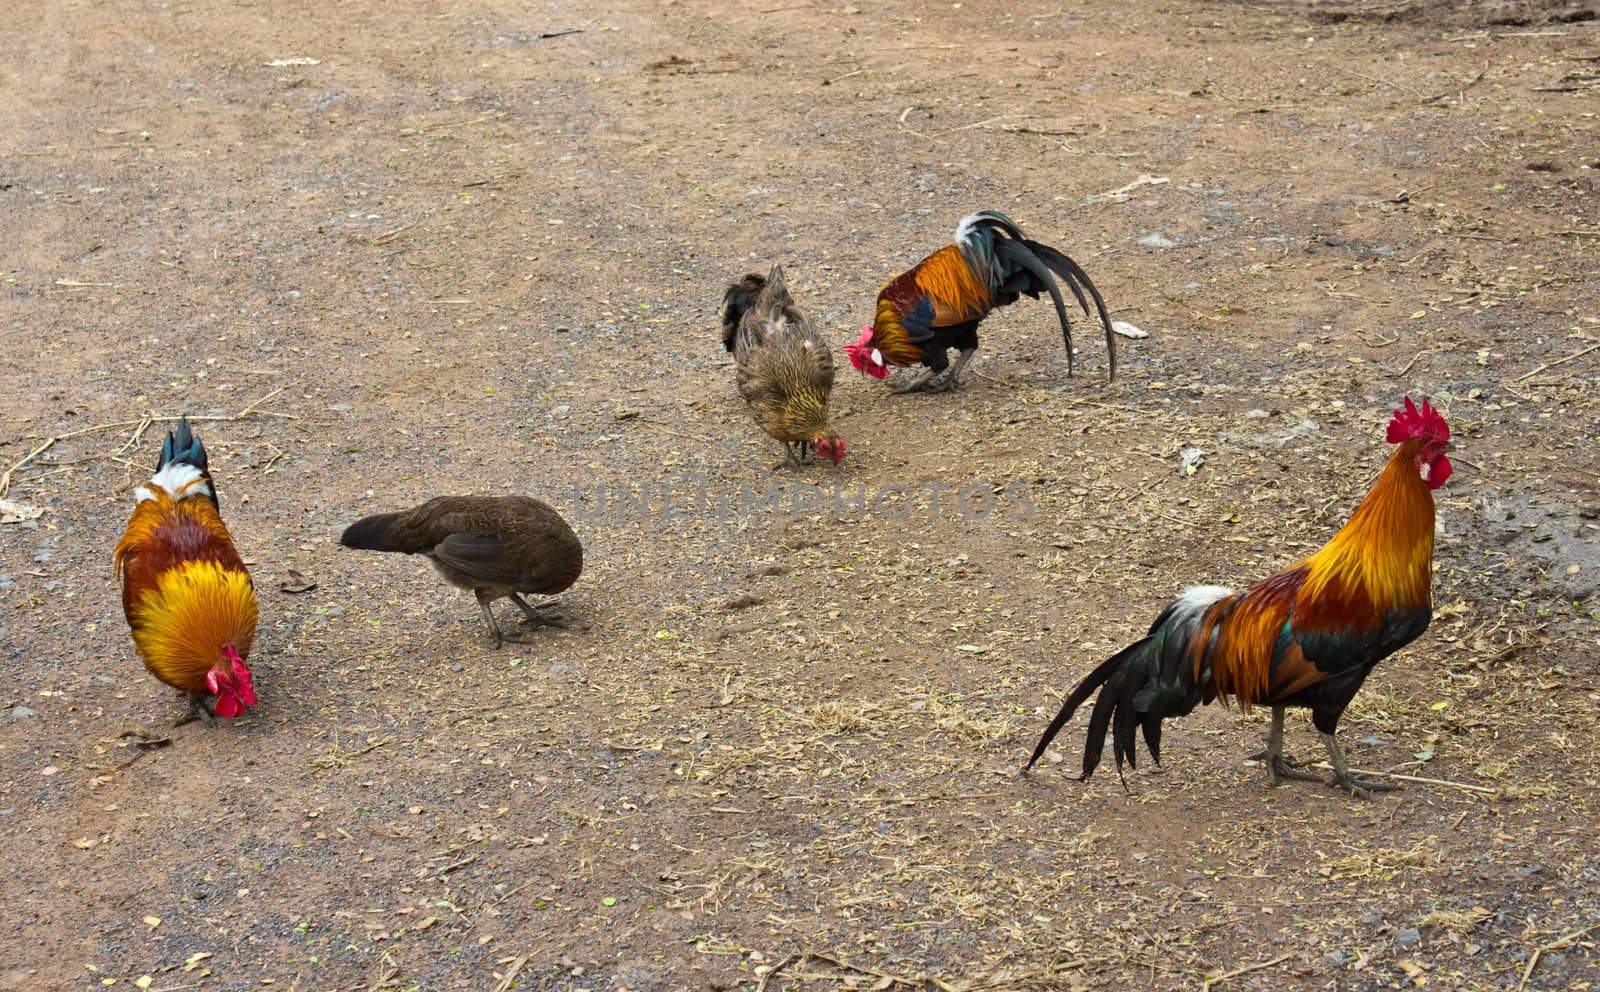 A group of pasture raised chickens peck for feed on the ground